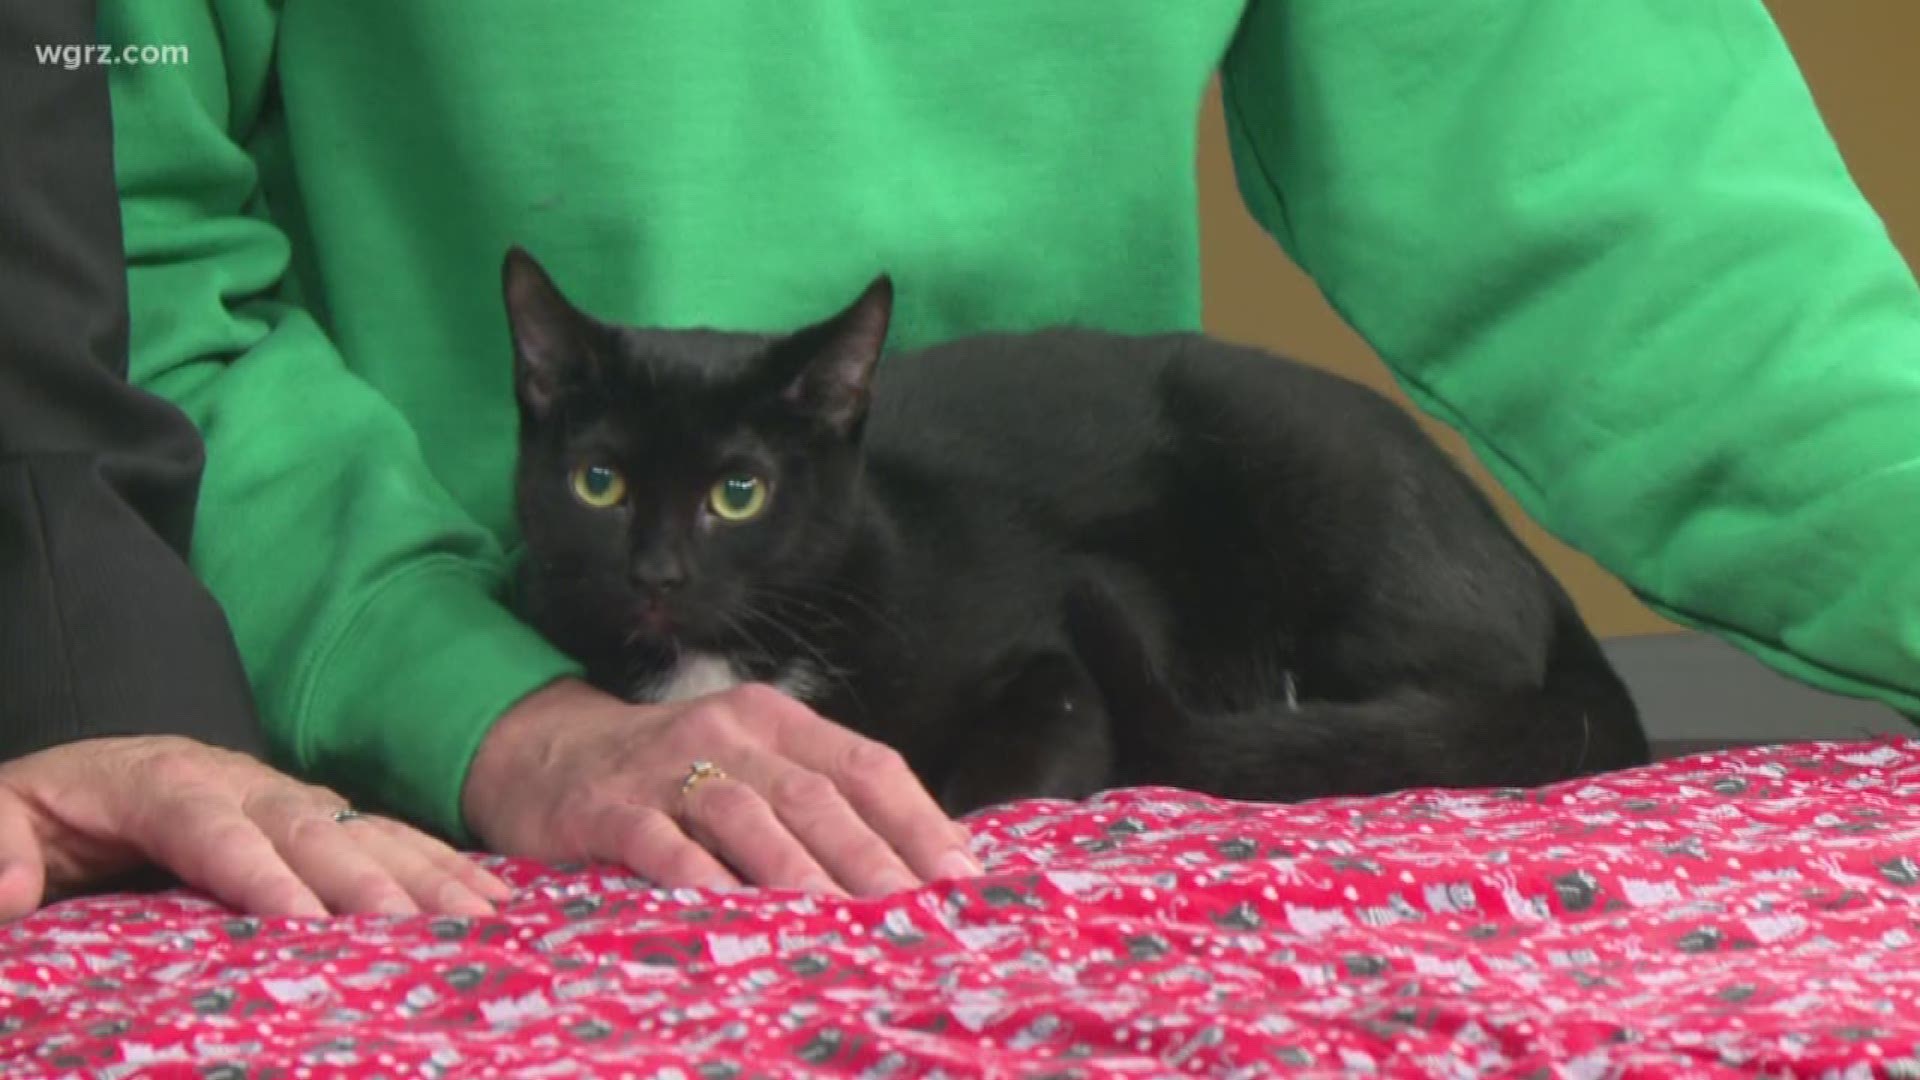 Katierose is a black cat at the City of Buffalo Animal Shelter who is one and a half years old. She is very calm and kind and is looking for a good home.